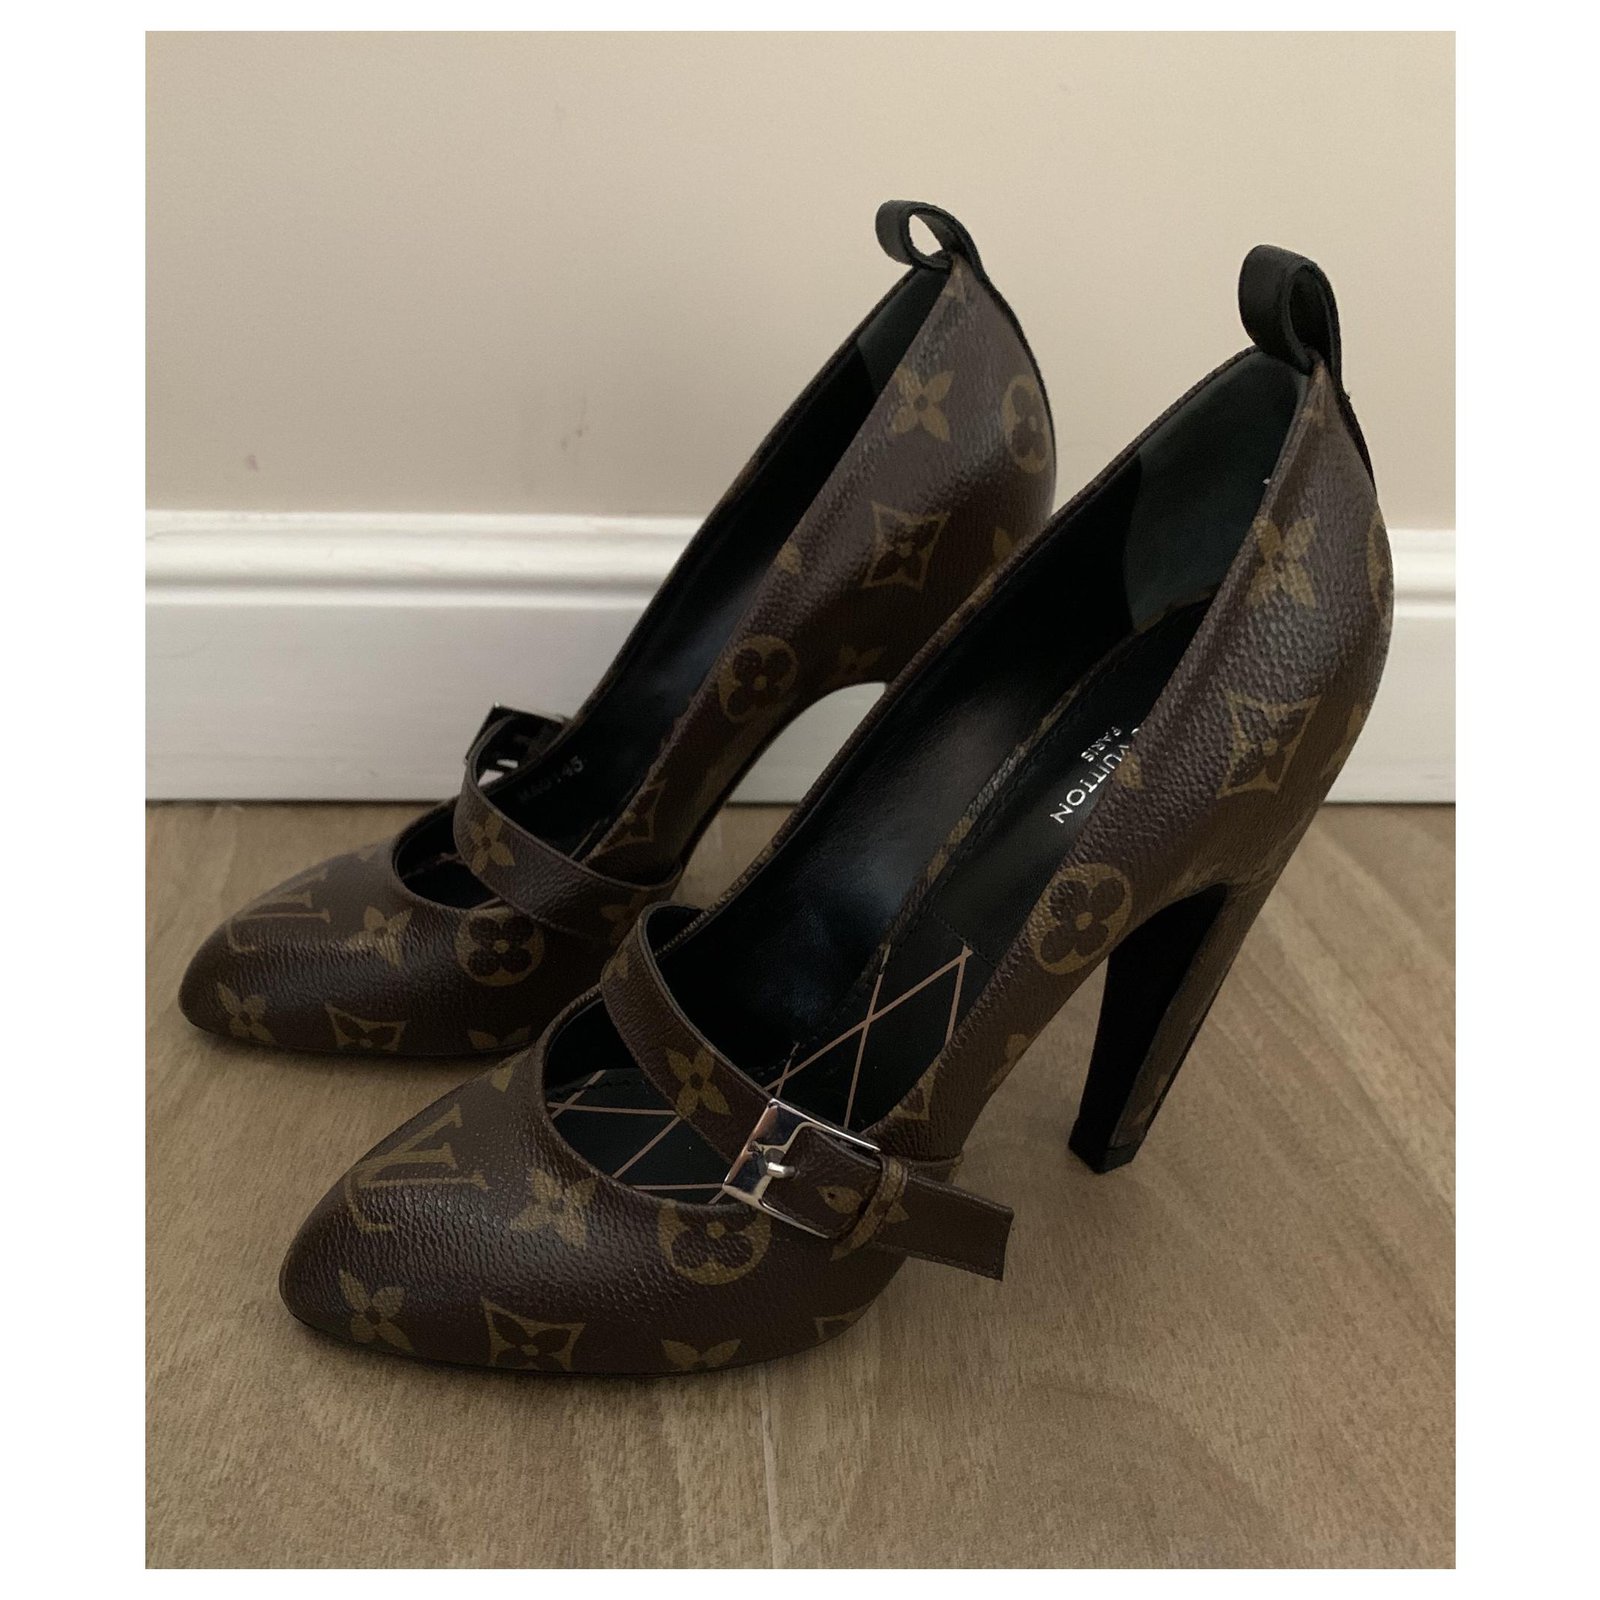 Louis Vuitton Heels Shoes Canvas 39 Brown Size 8 - $385 (43% Off Retail) -  From Heather